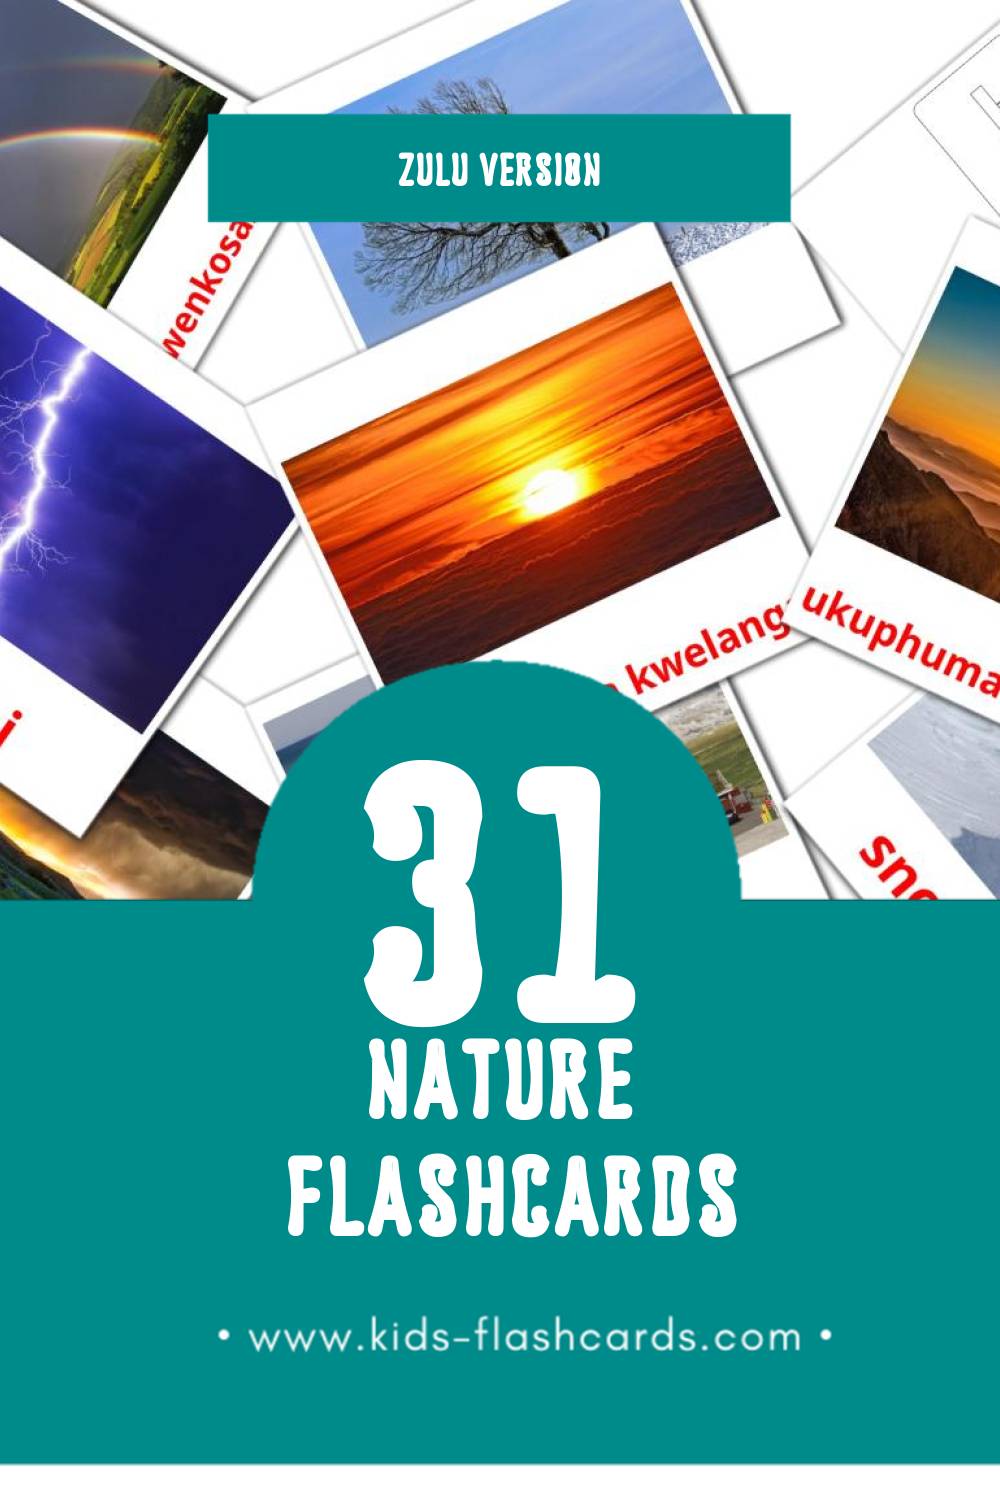 Visual isidalo Flashcards for Toddlers (31 cards in Zulu)